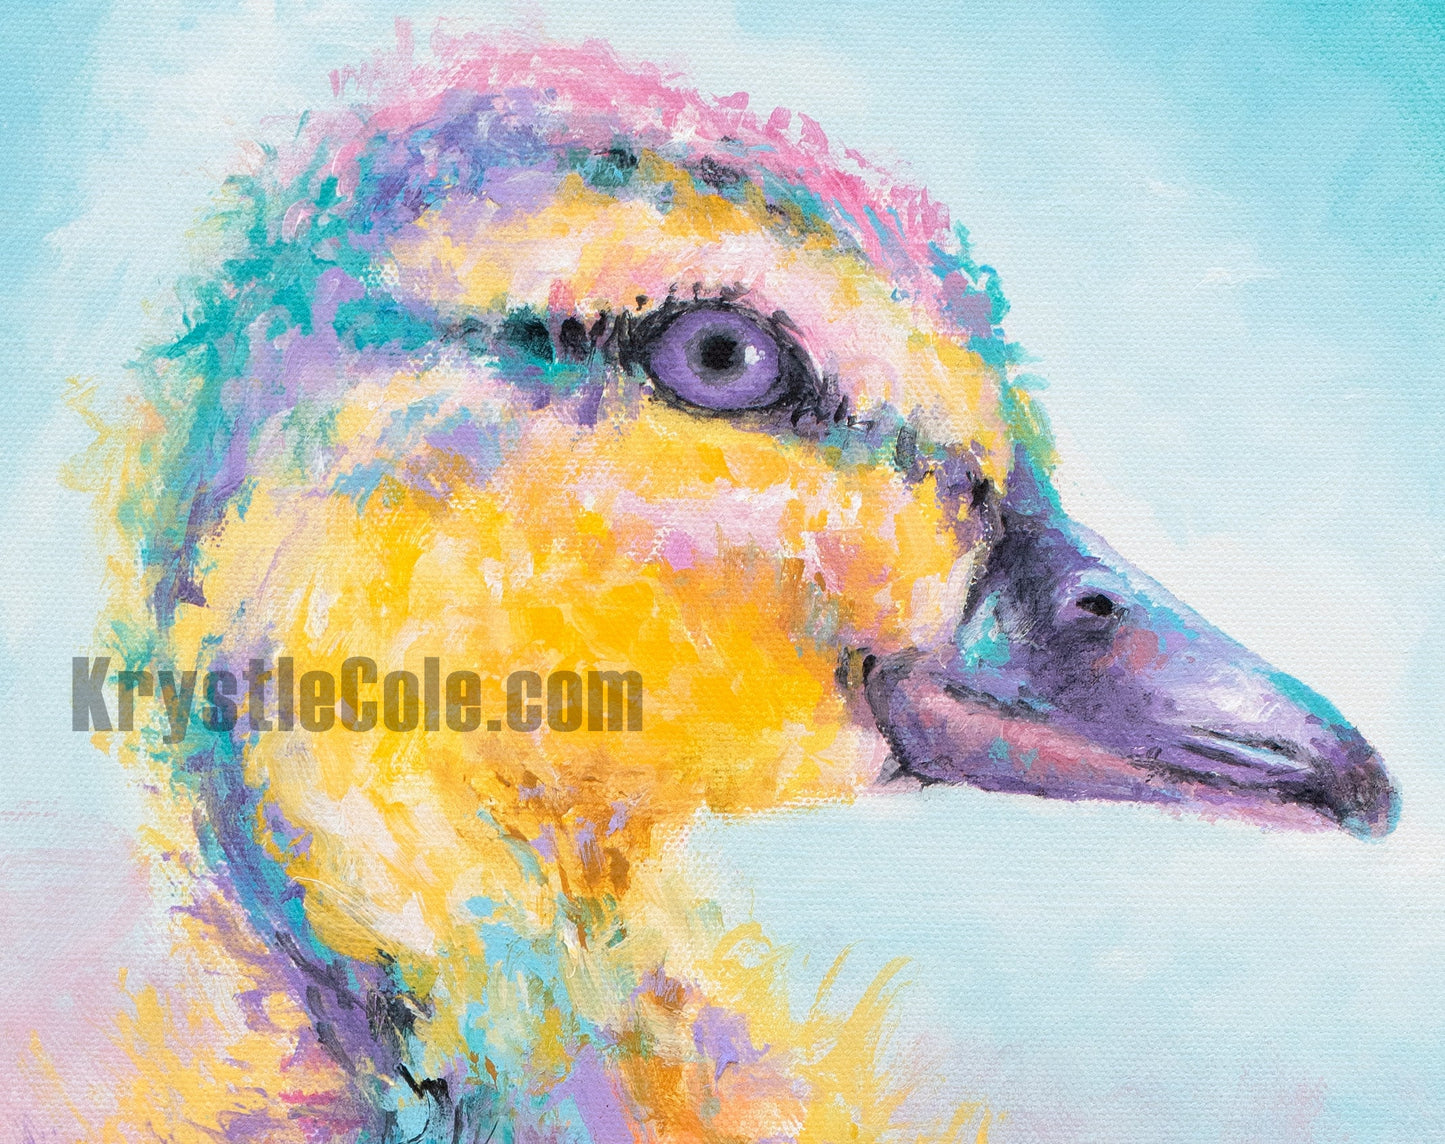 Duckling Painting - 16x20"